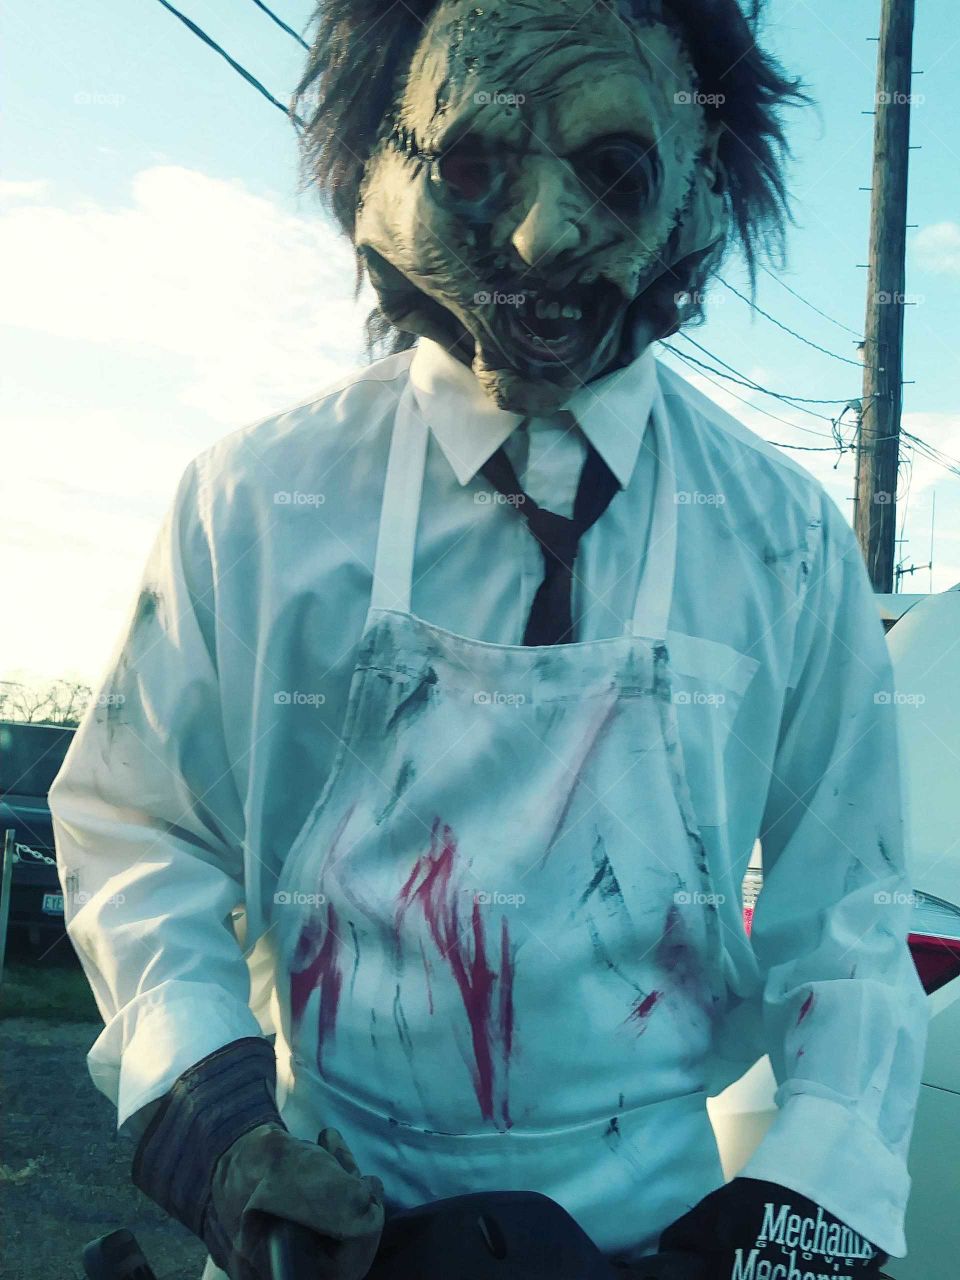 leatherface at the drive in